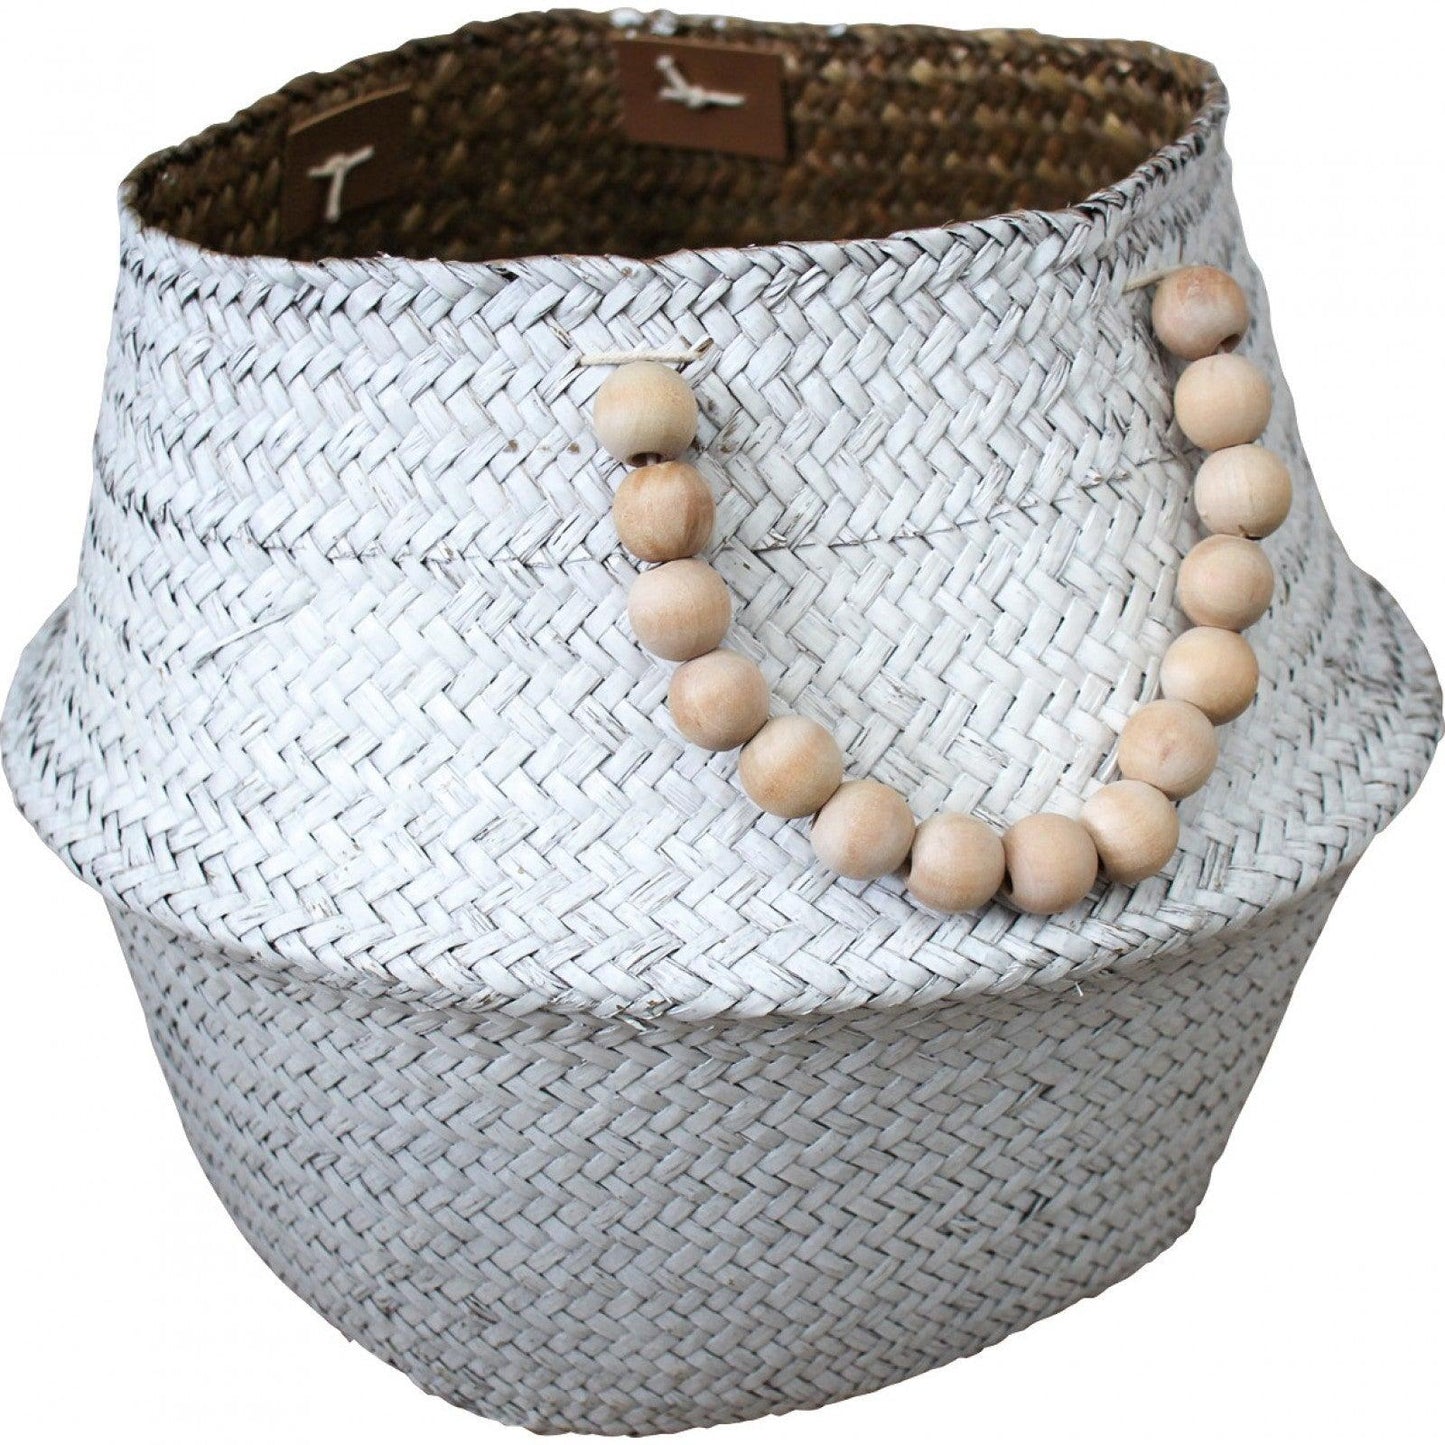 Belly Basket White Beads